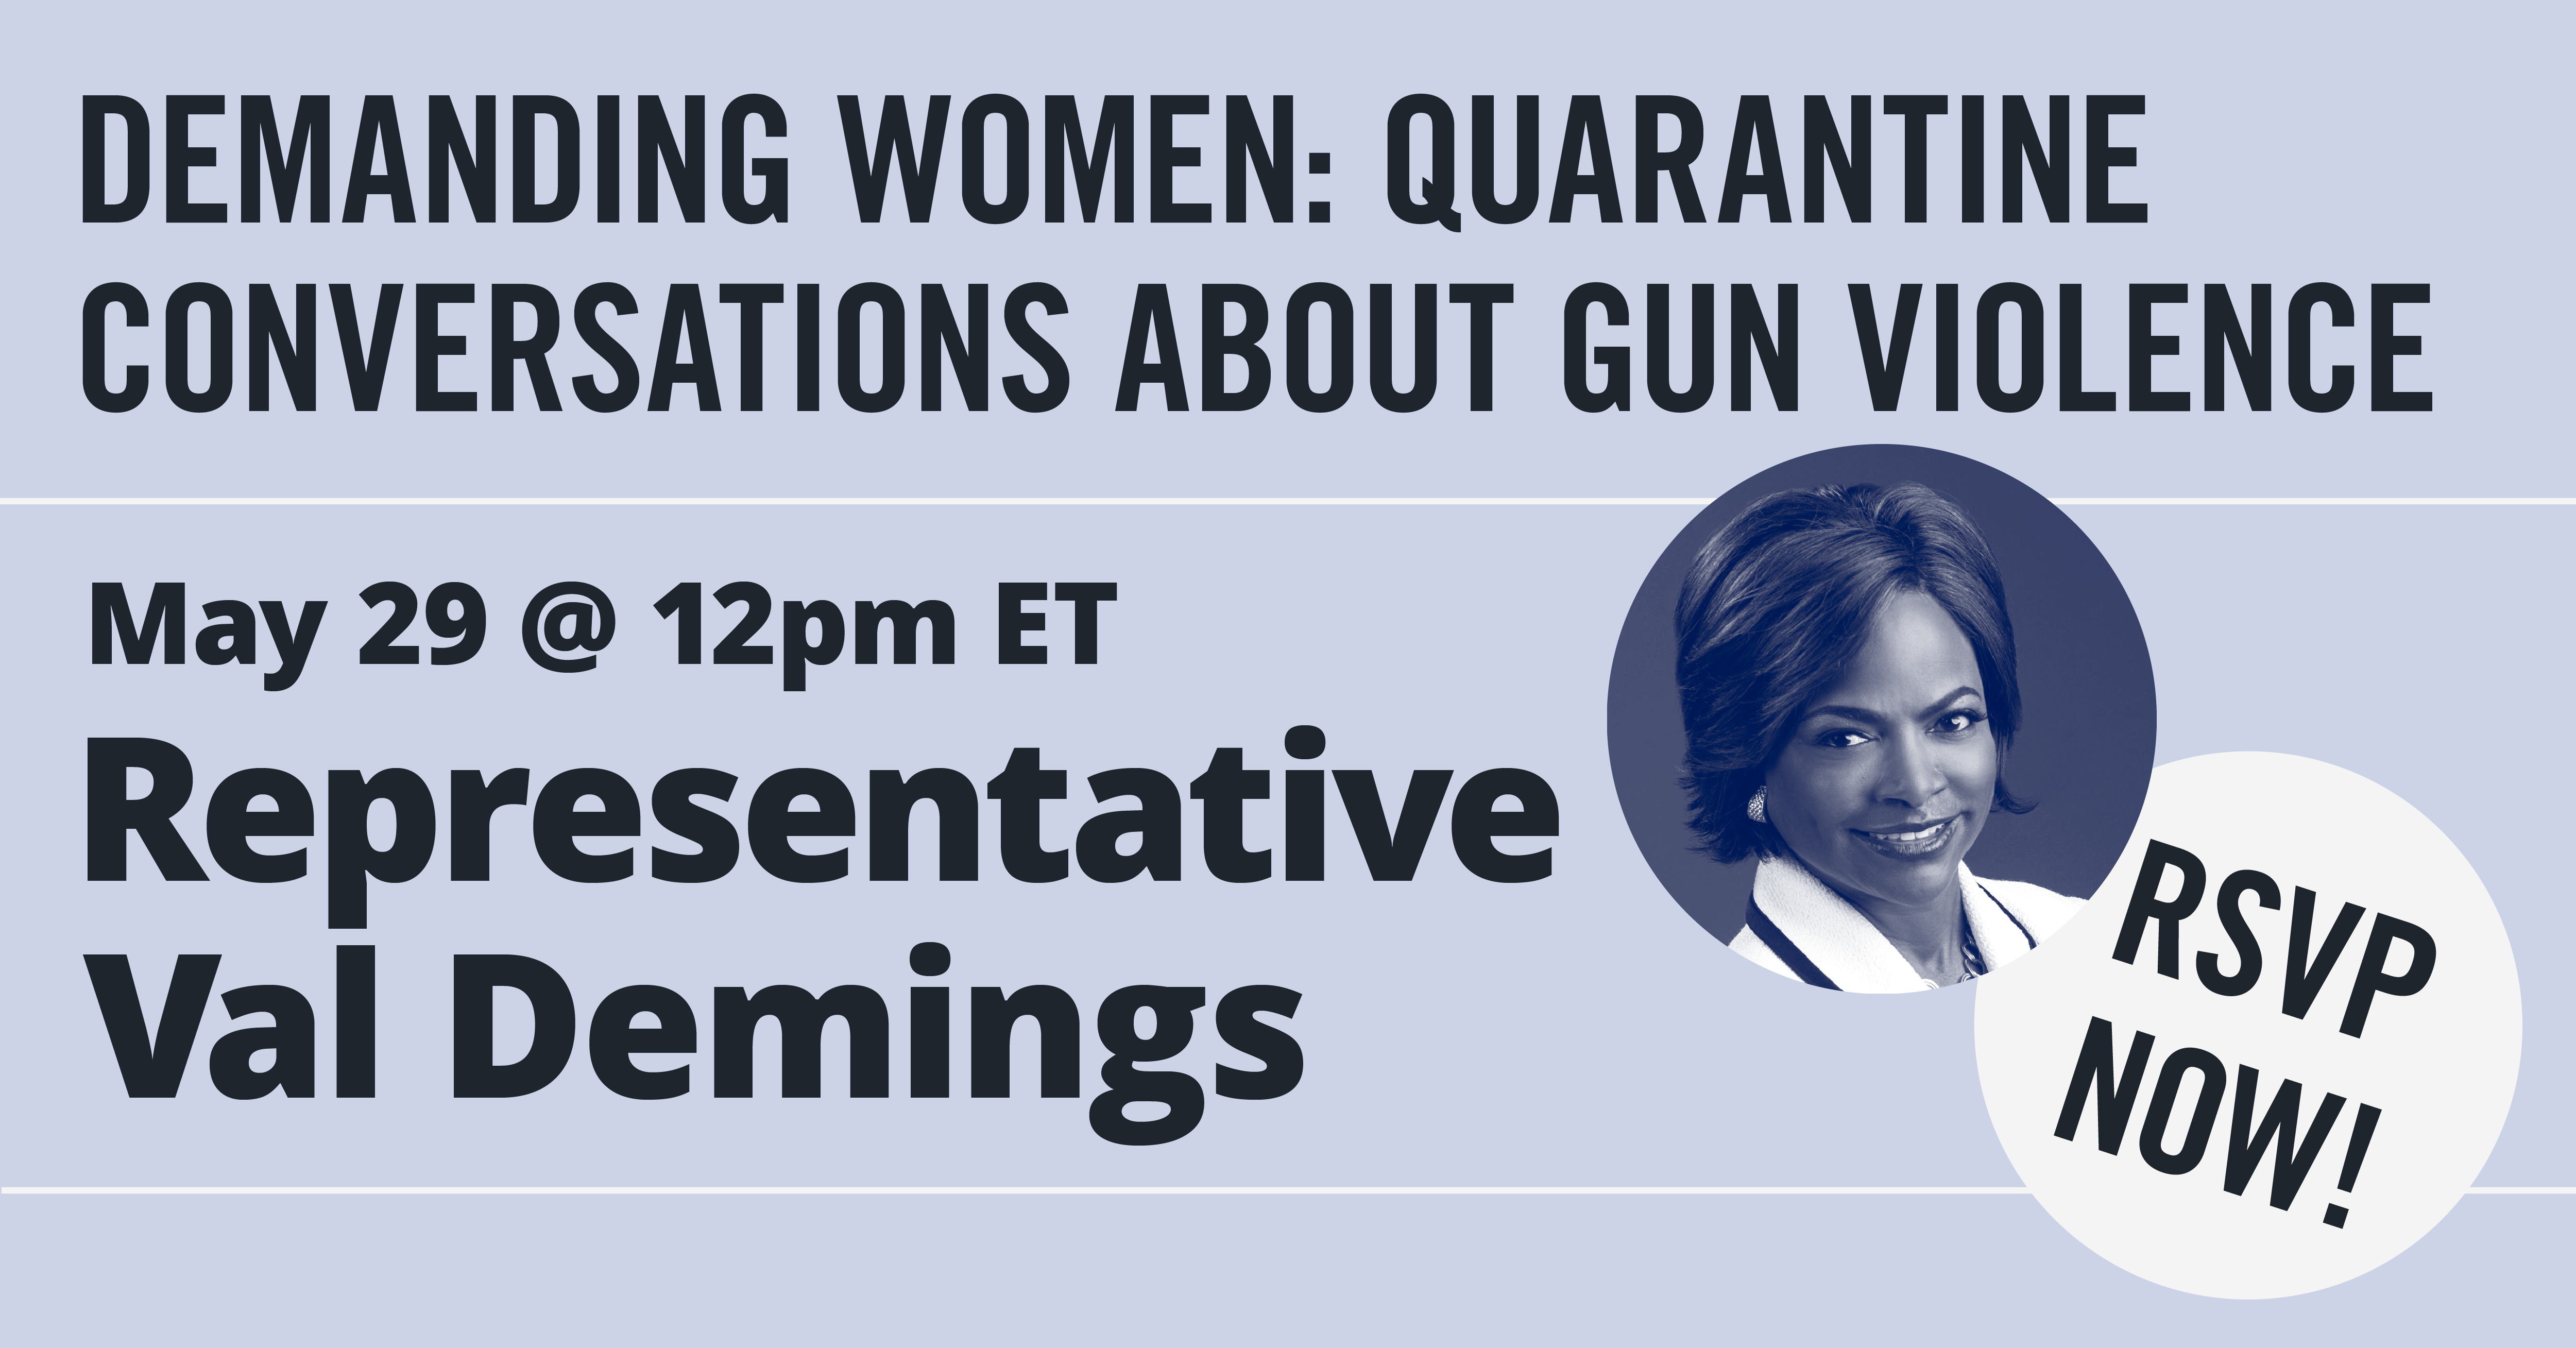 RSVP now for today's conversation with Rep. Val Demings.